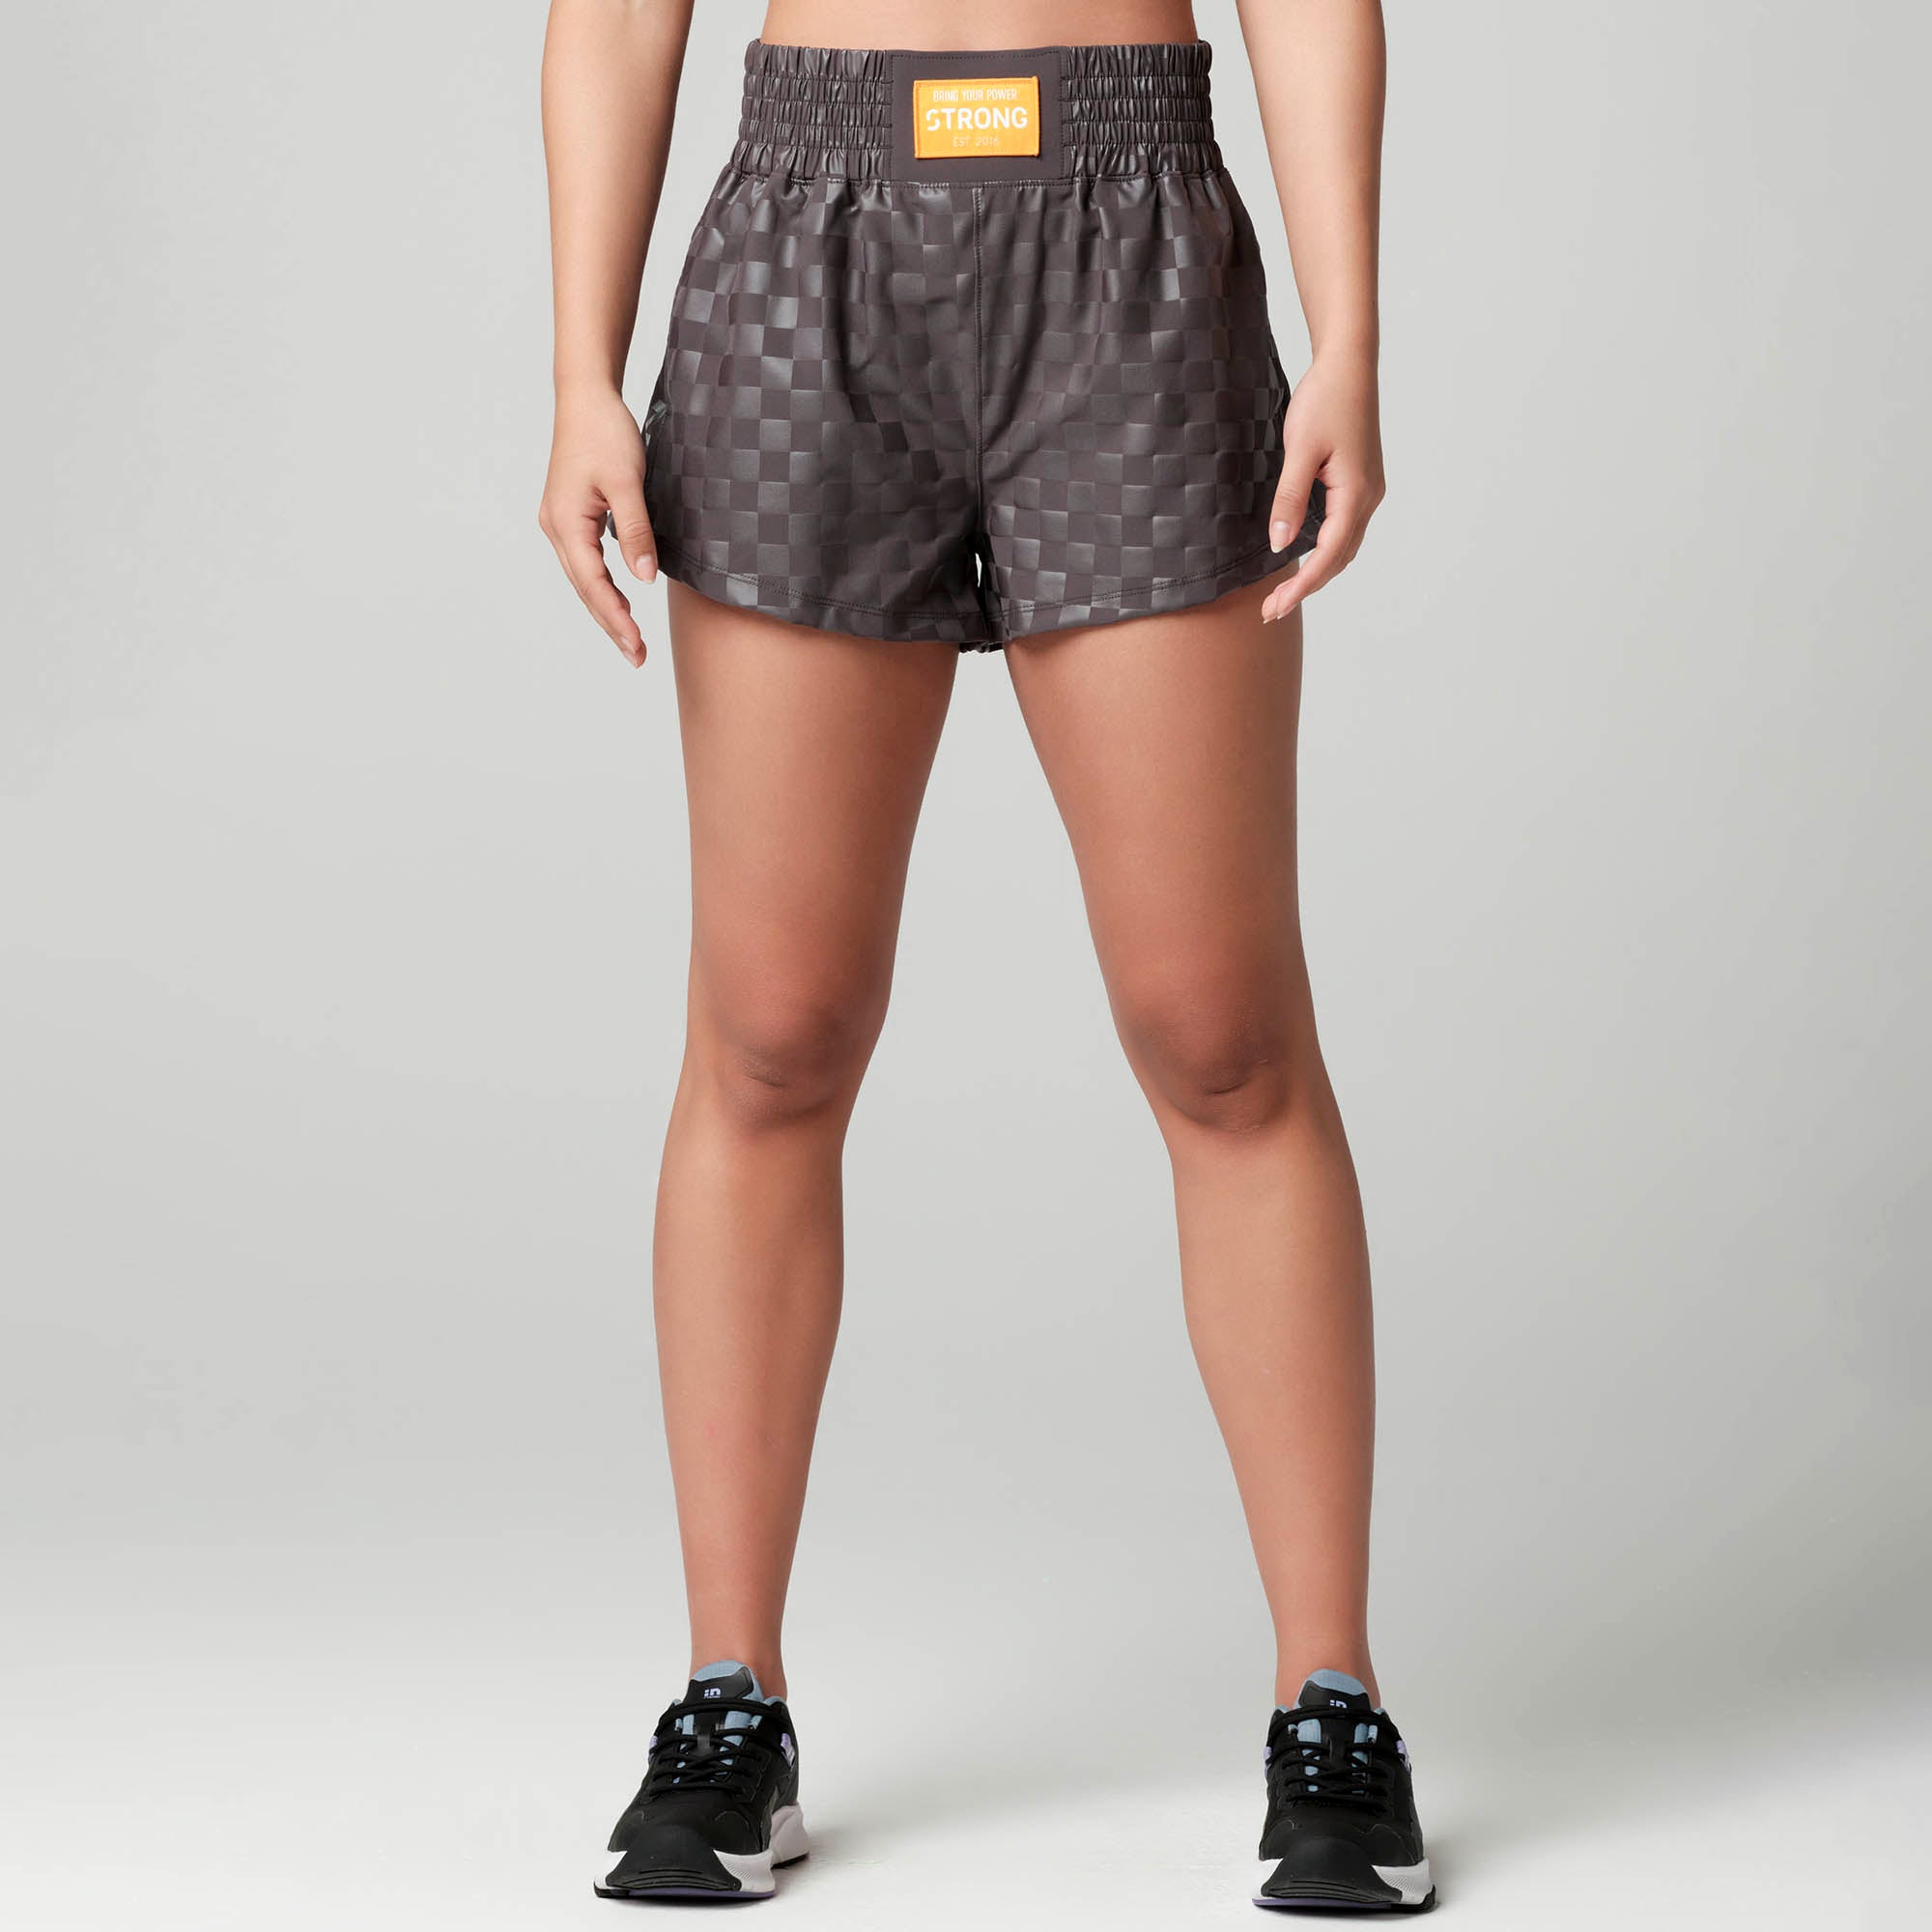 Bring Your Power High Waisted Loose Shorts (Special Order)